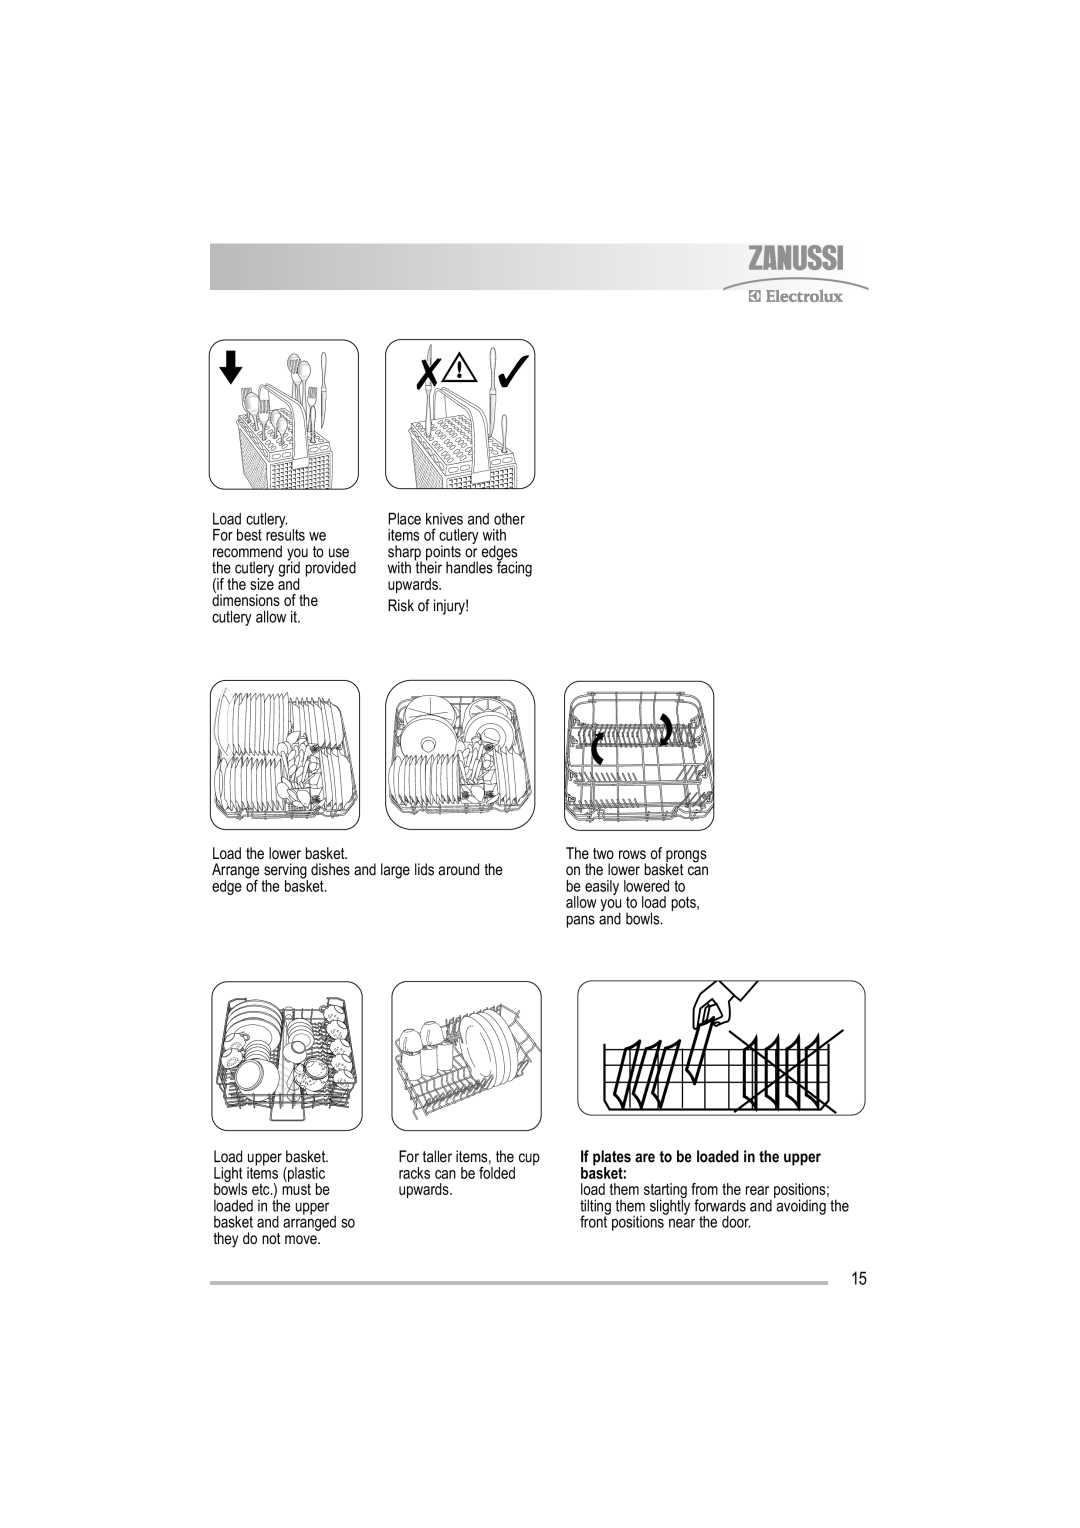 Electrolux ZDF 501 user manual If plates are to be loaded in the upper basket 